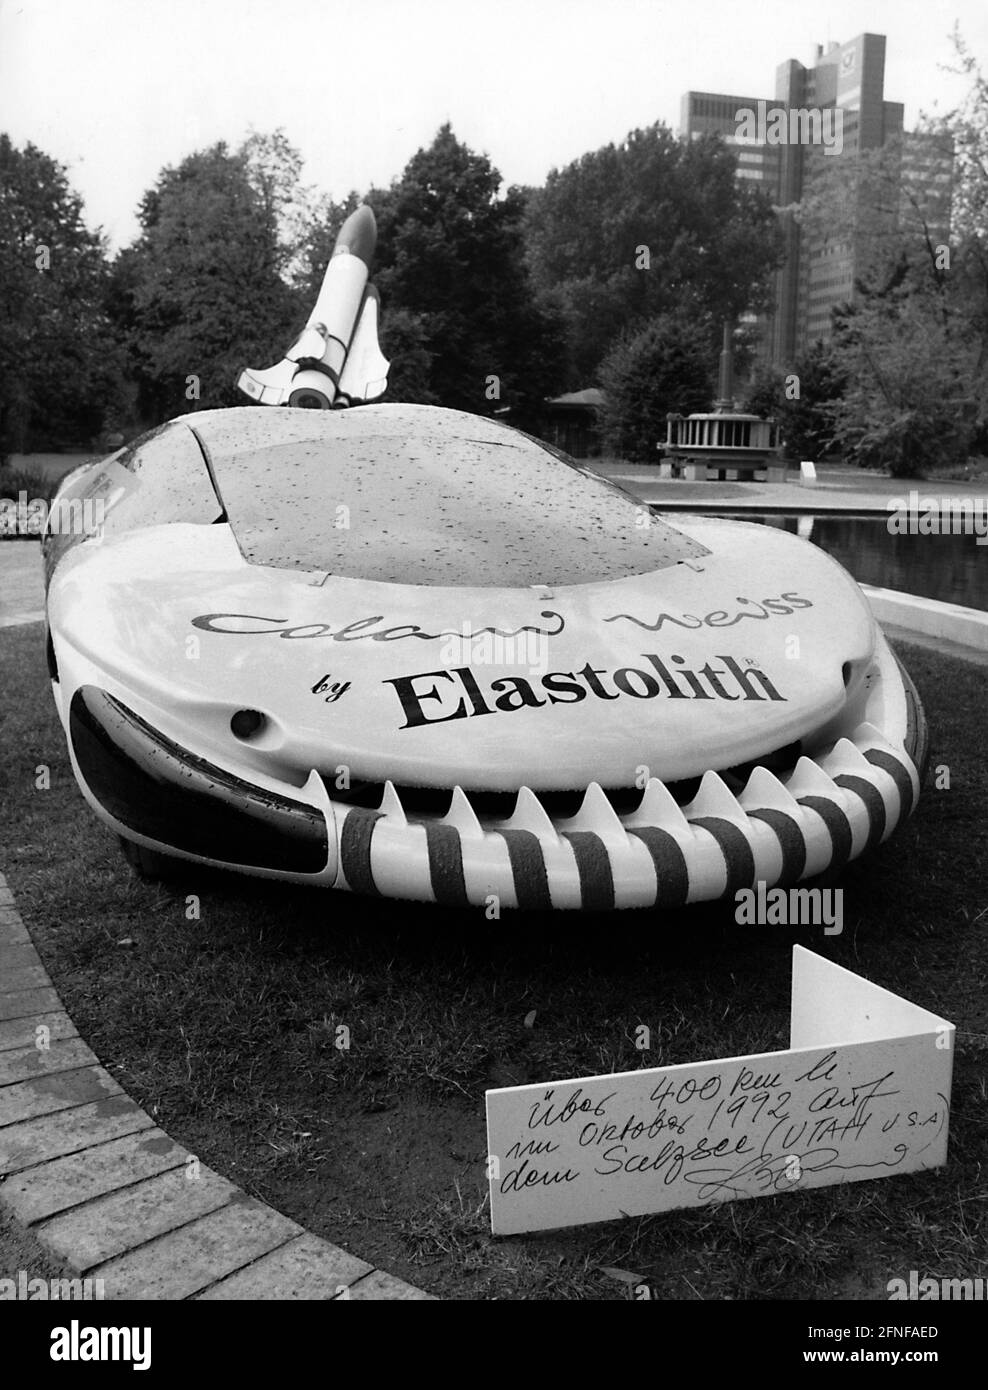 'A car designed by the German designer Luigi Colani that exceeded the speed of 400 km/h at the Salt Lake in Utah, USA, in 1992. For the first time new plastic materials of the Paderborn company Elastolith were used in the car. The car was on display in 1992 at the exhibition ''The round world of Luigi Colani-40 years of design'' in Dortmund's Westfalen Park. [automated translation]' Stock Photo